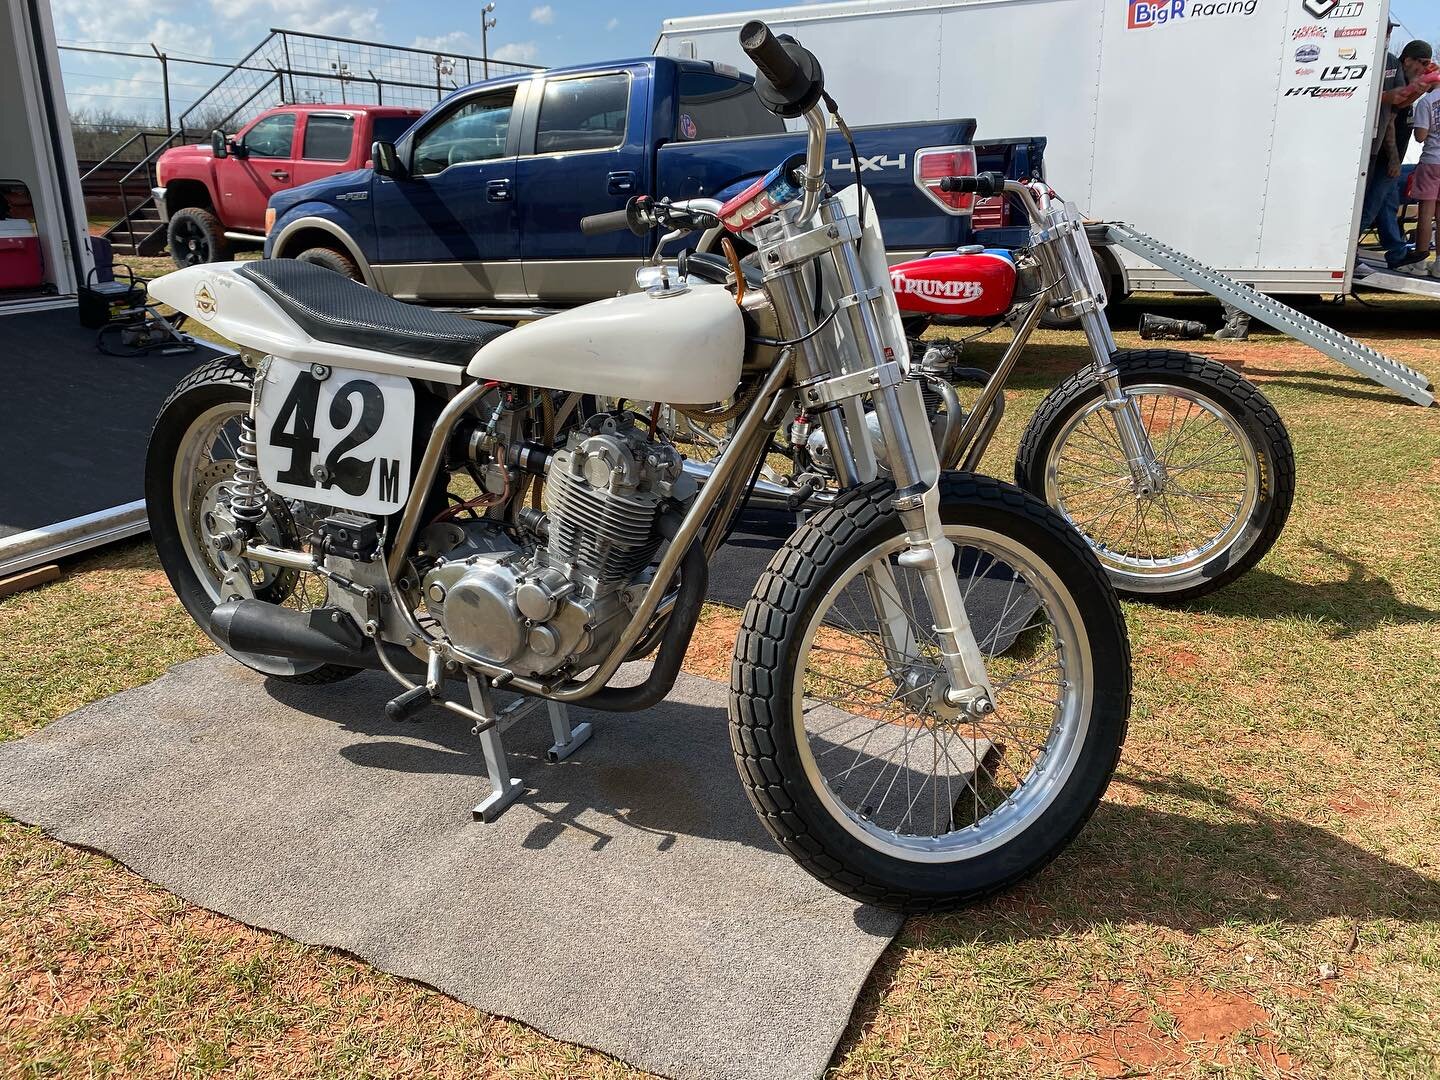 Just a few of the bikes from our first event at @red.dirt.raceway 

#NFT #nationalflattrack #flattrack #motorcycleracing #oklahoma #reddirtraceway